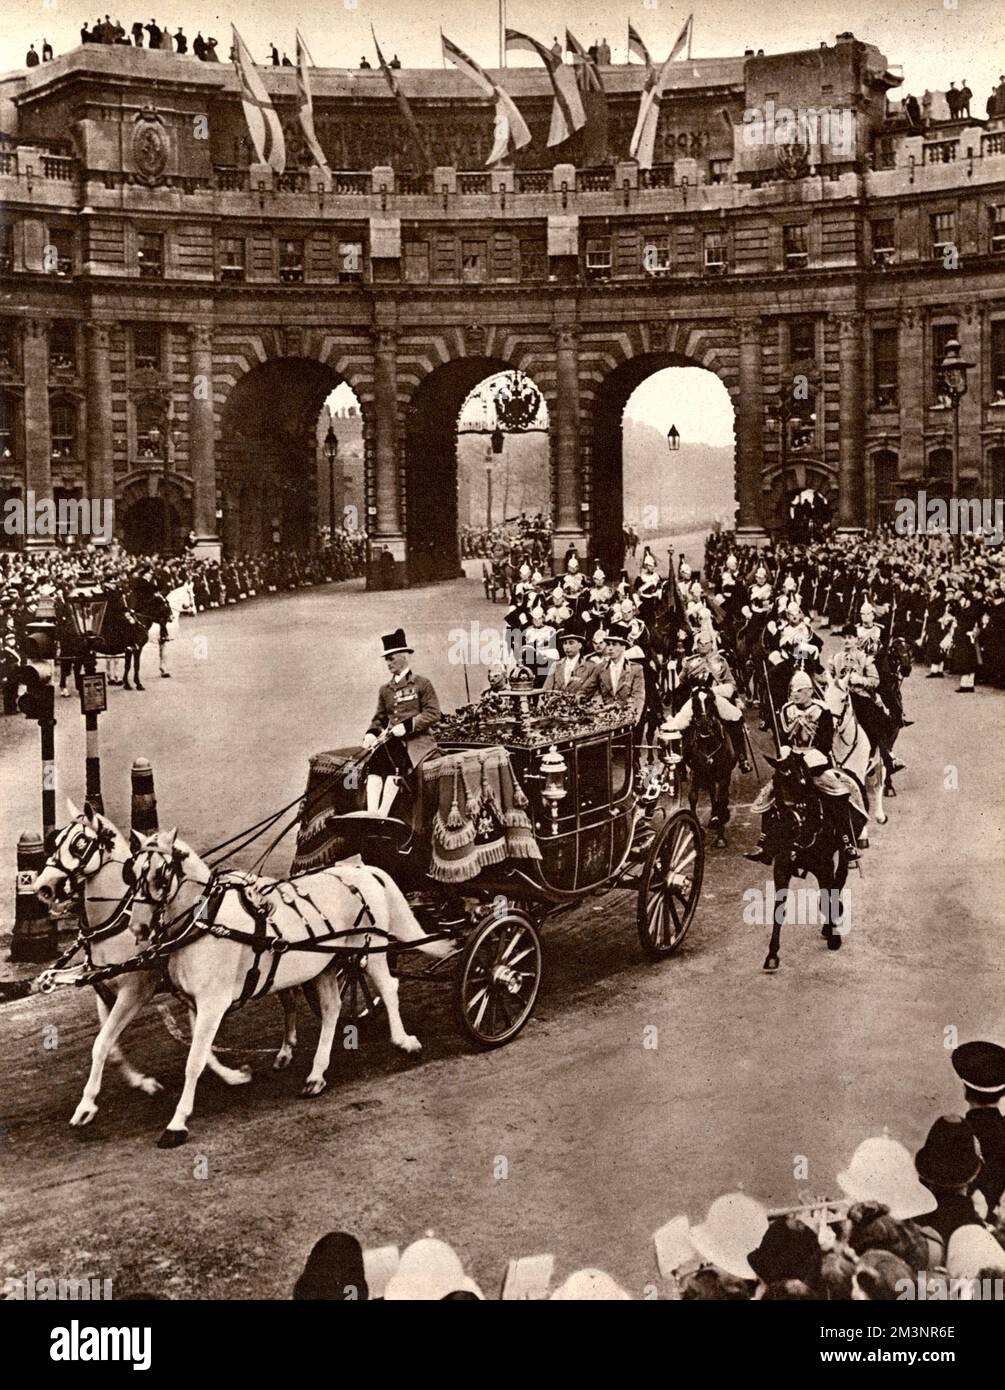 The marriage of Princess Elizabeth (future Queen Elizabeth II) to Prince Philip of Greece on 20th November 1947. The wedding procession en route to Westminster Abbey from Buckingham Palace, passing through Admiralty Arch from The Mall and entering Trafalgar Square.  1947 Stock Photo